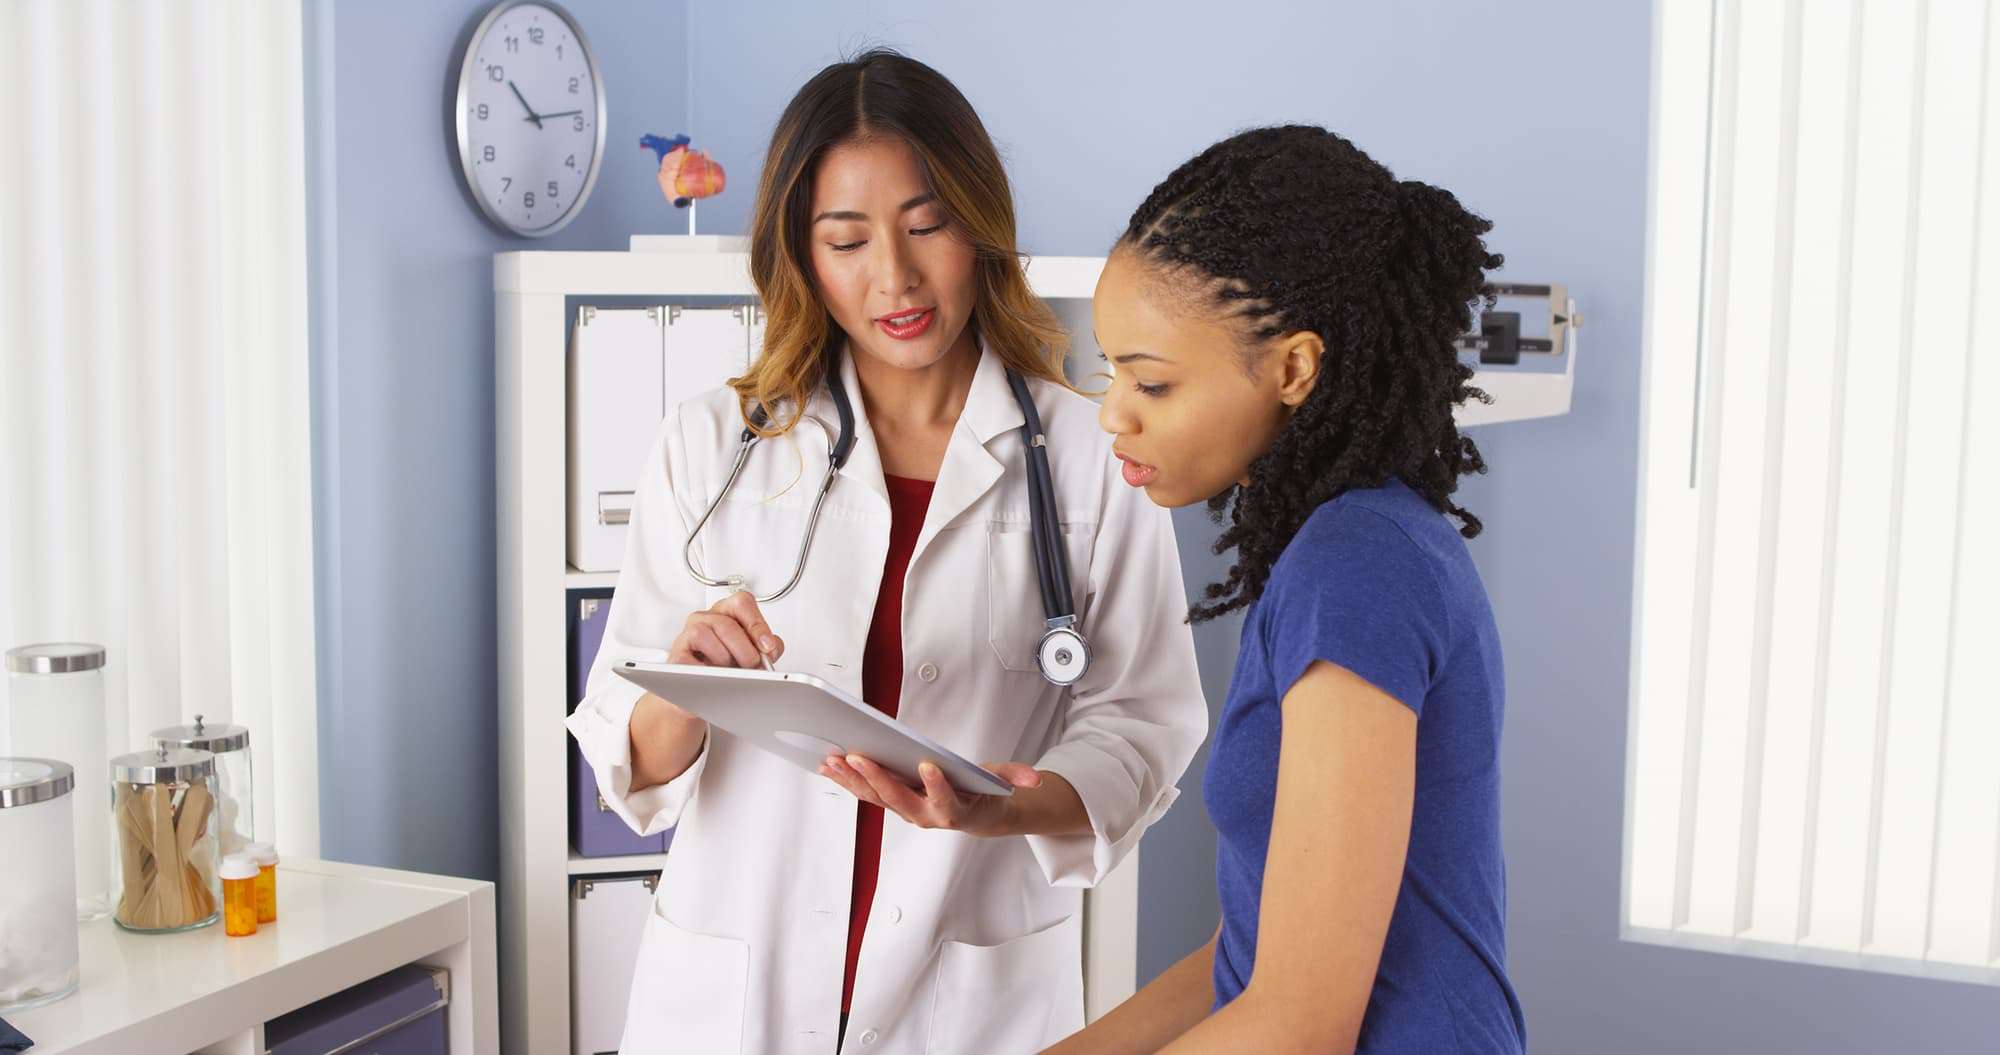 A medical professional reviewing test results with a patient in a doctor's office.